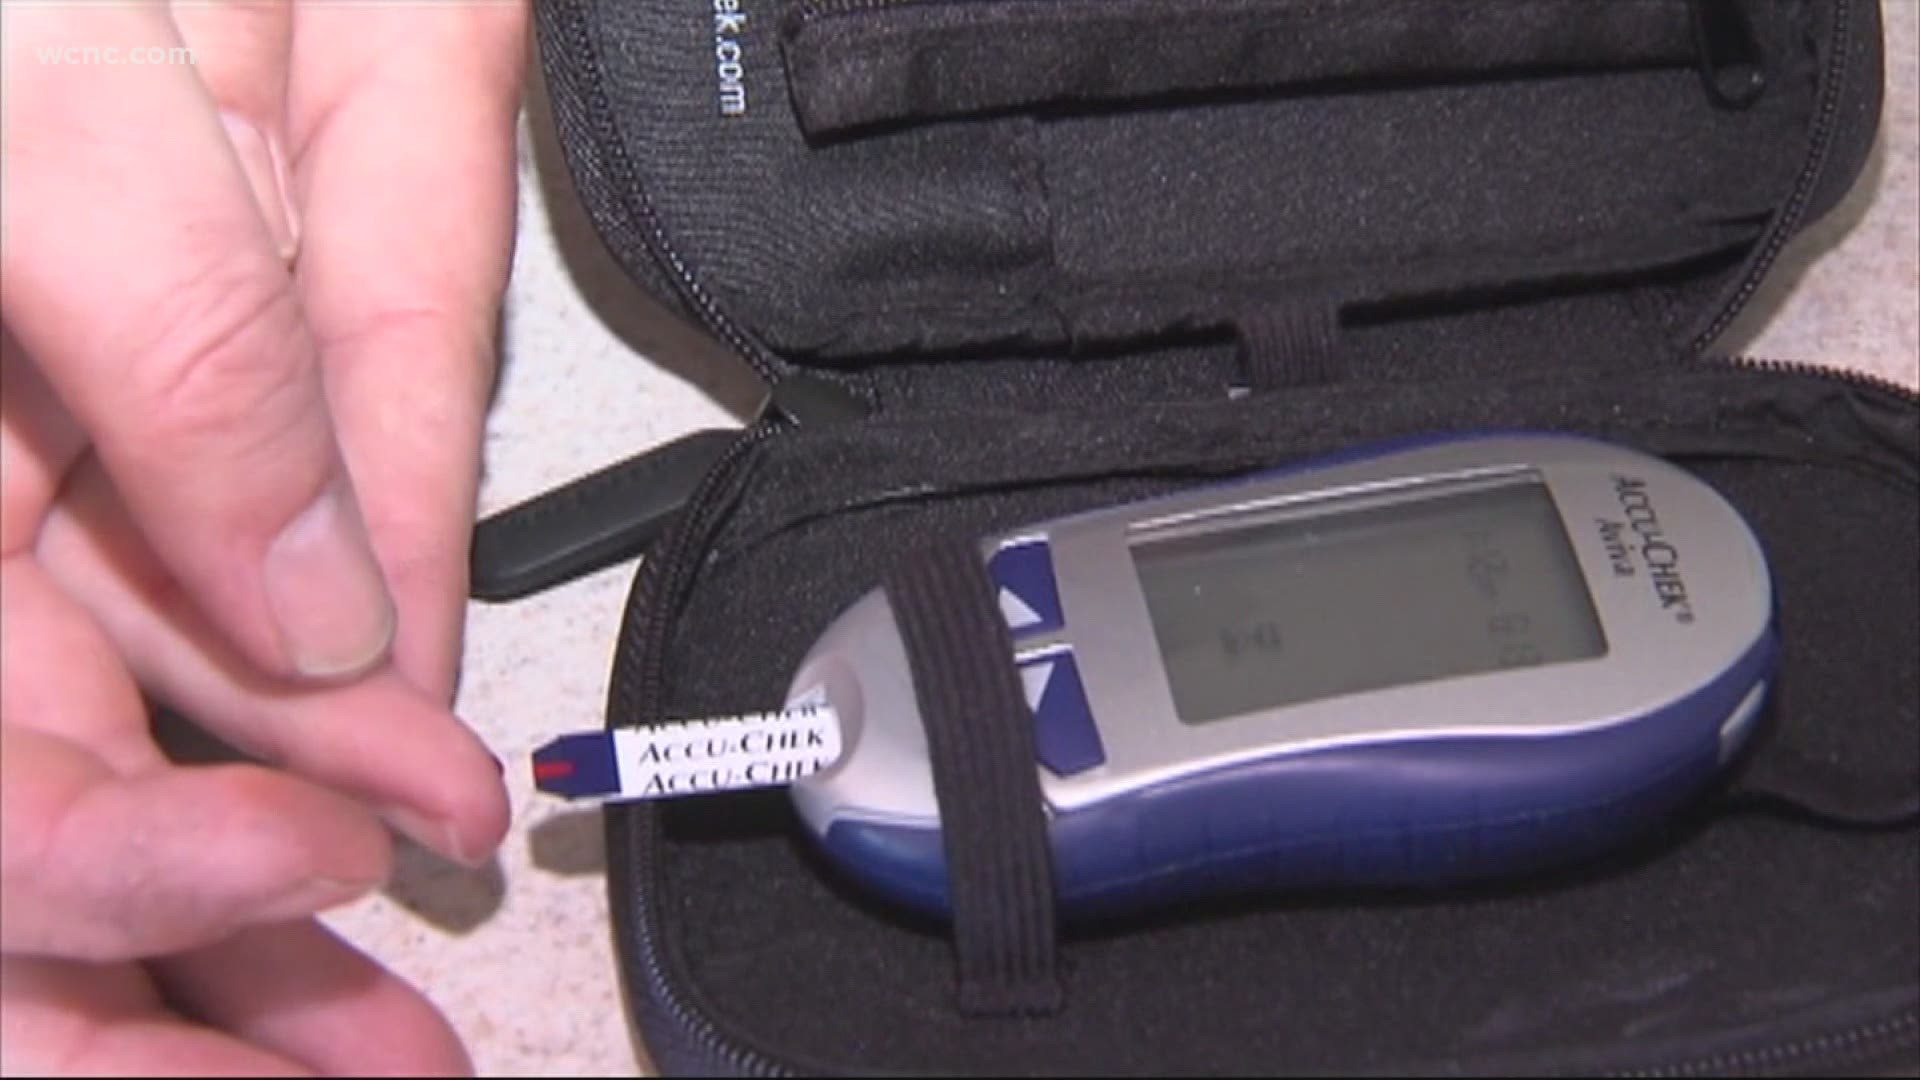 While doctors say it's not clear that those with diabetes are at greater risk for contracting COVID-19, they may face more severe illness if they do get the virus.